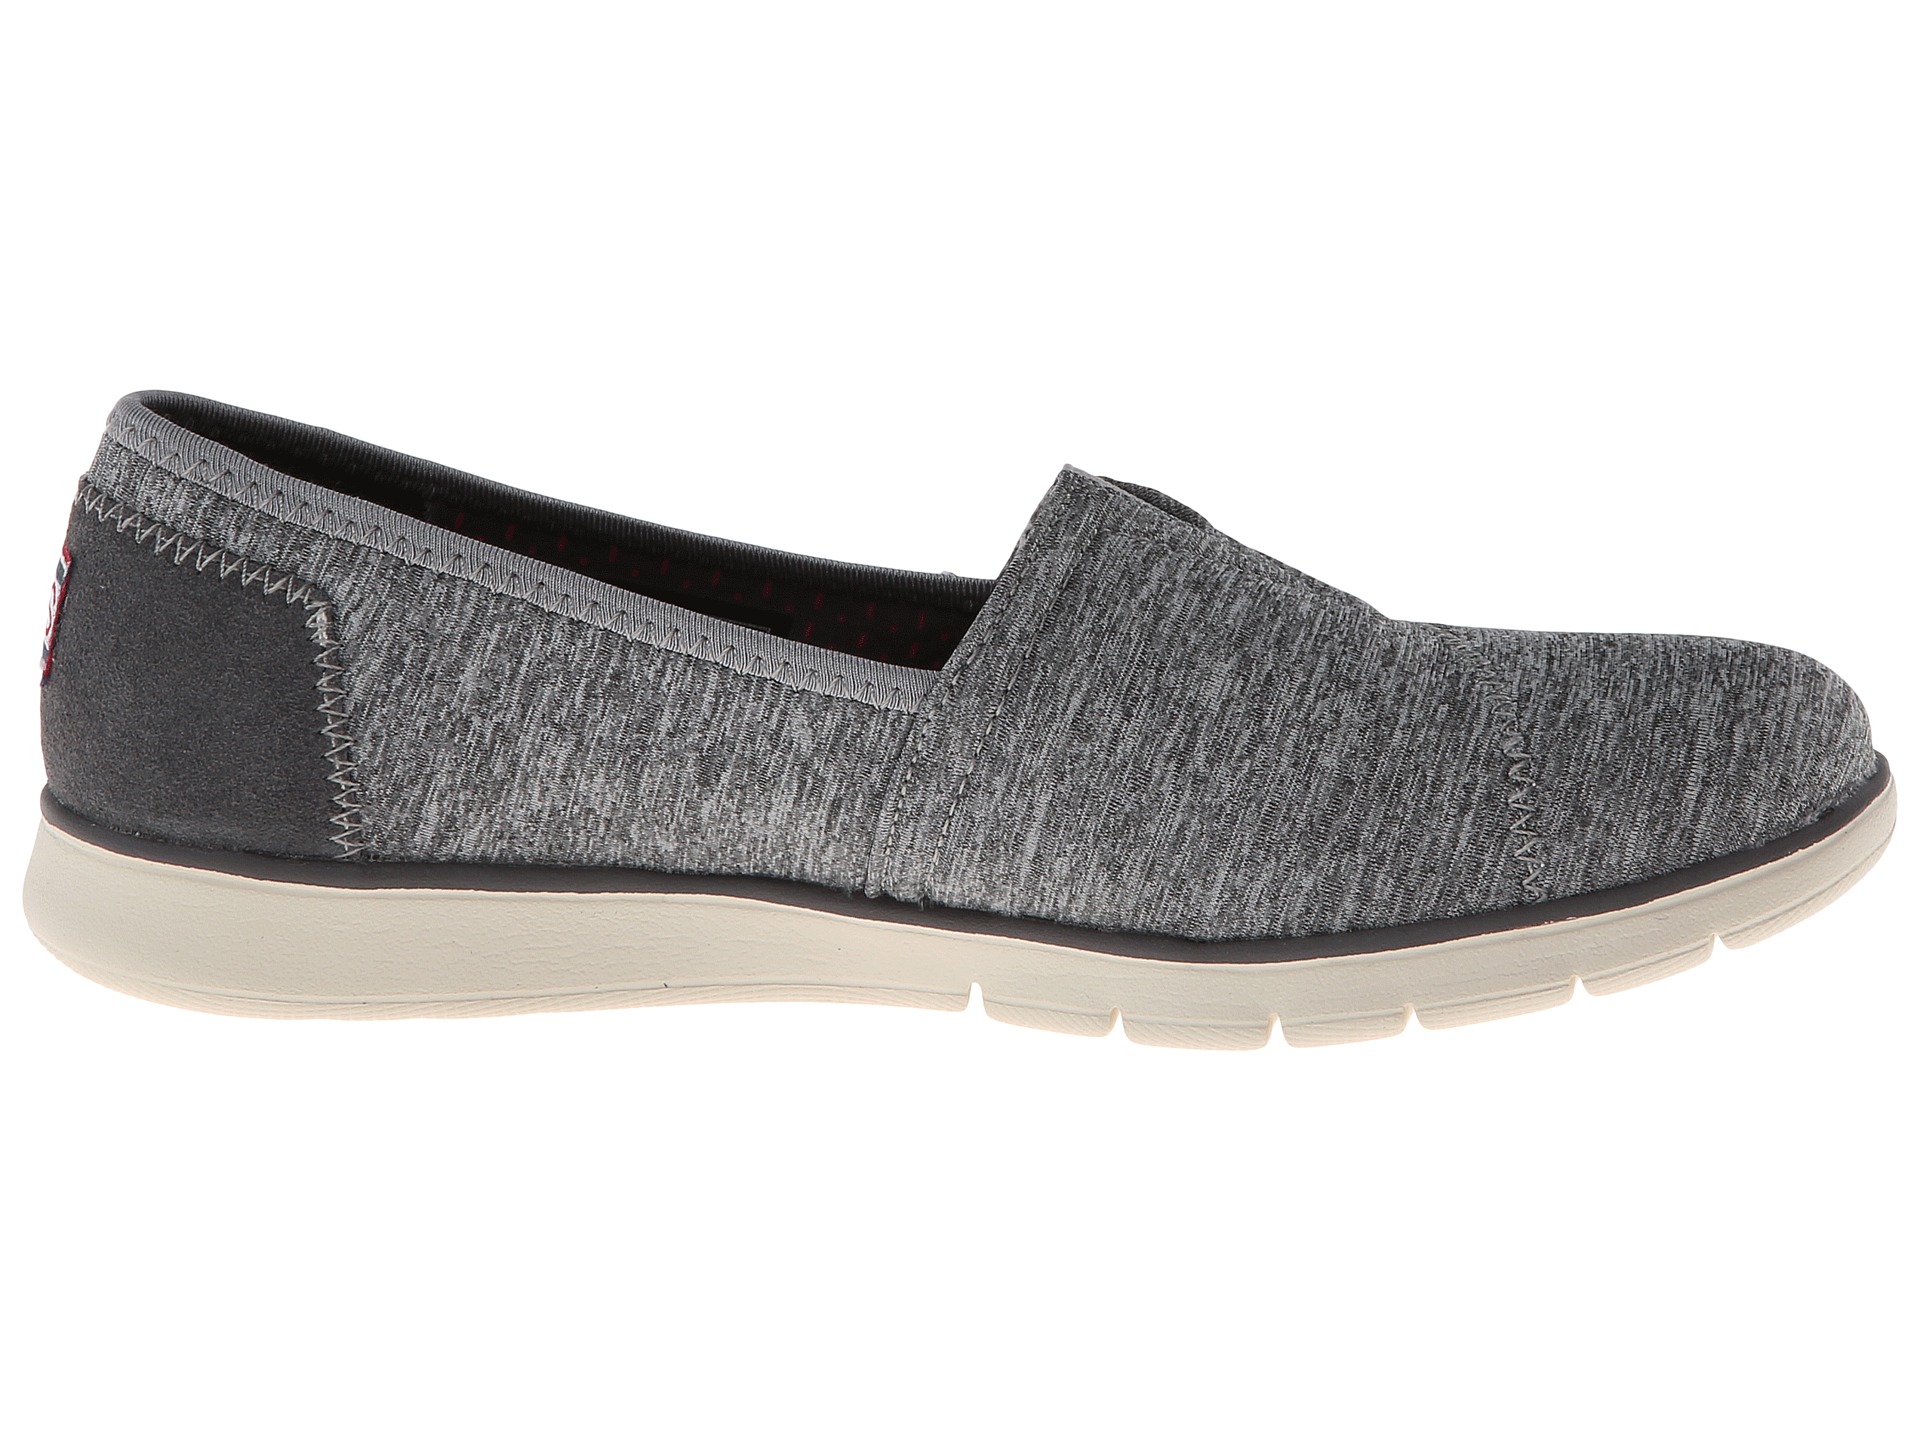 Bobs From Skechers Pureflex Heathers Gray | Shipped Free at Zappos